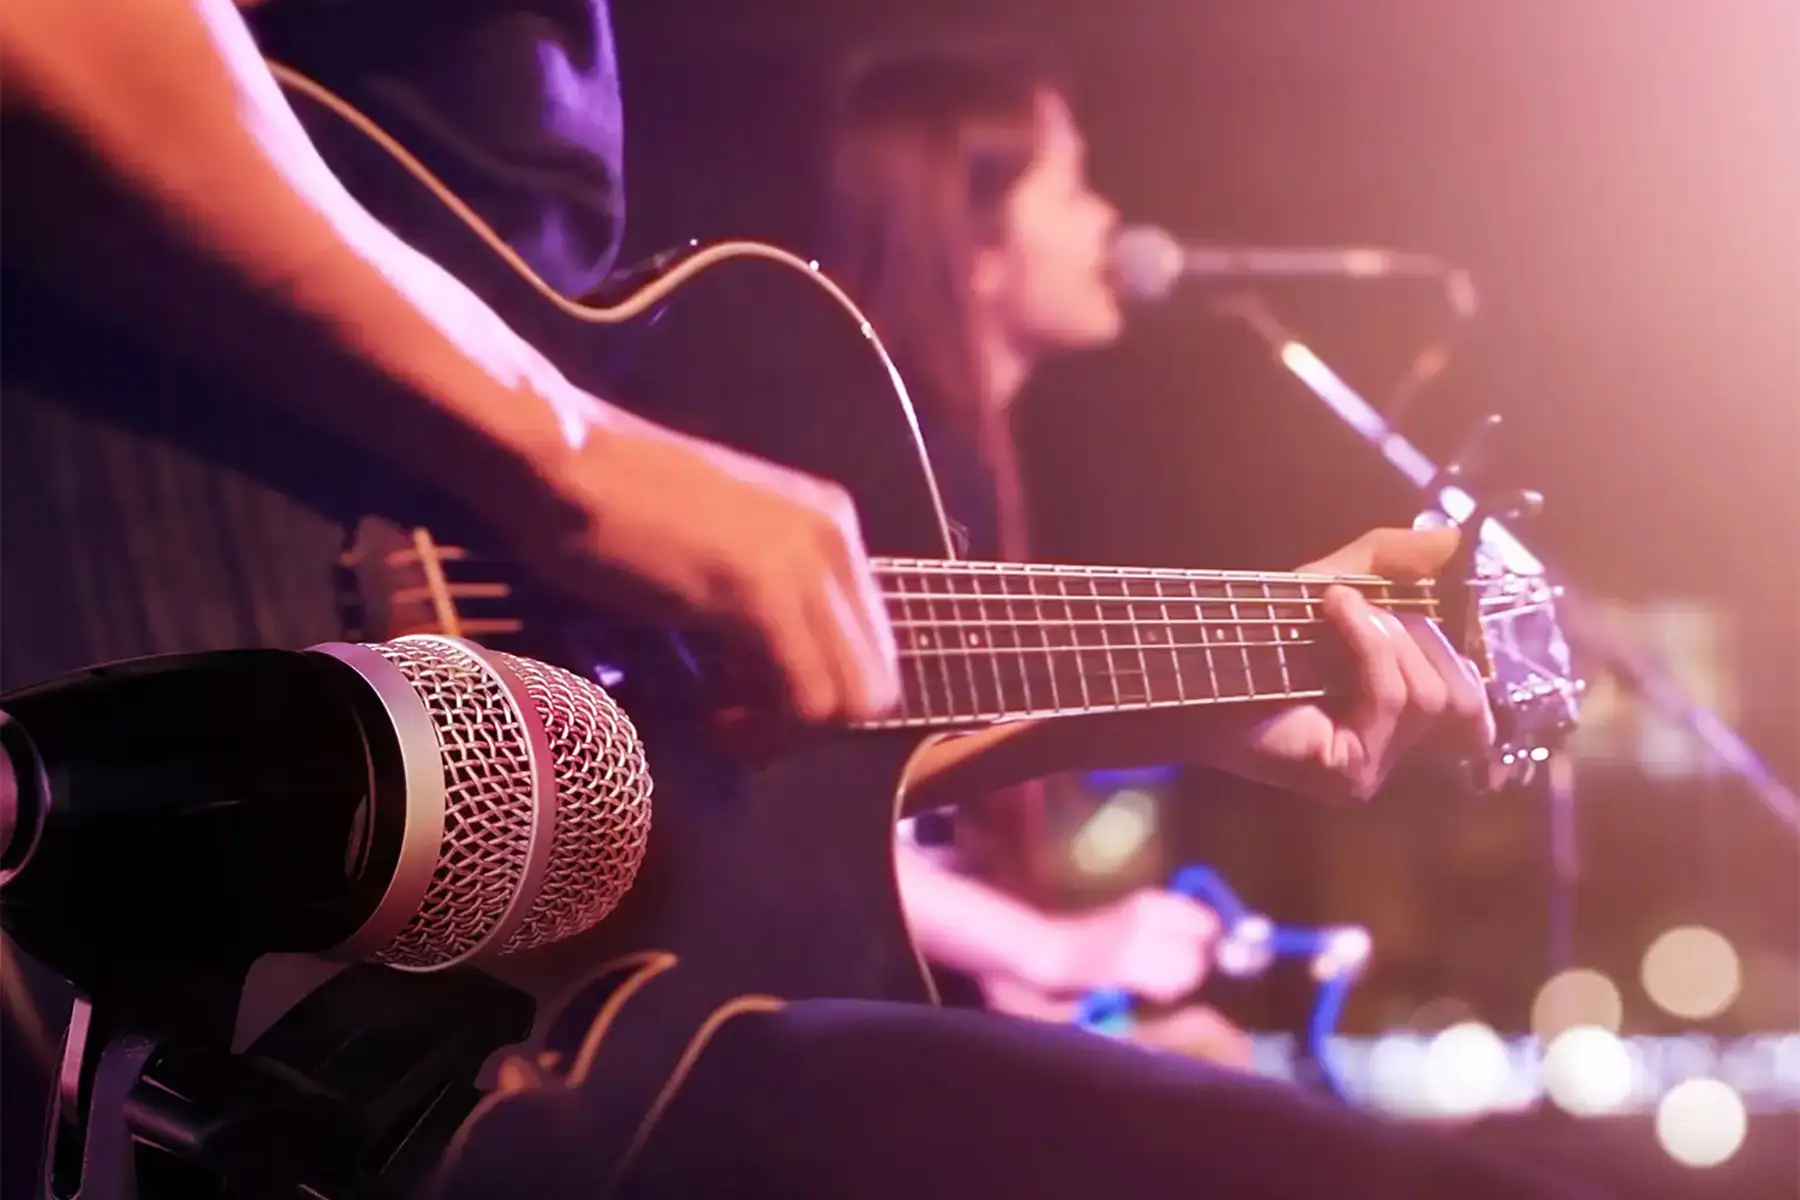 Close up of accoustic guitar being played on stage during a live concert performance in the showroom.